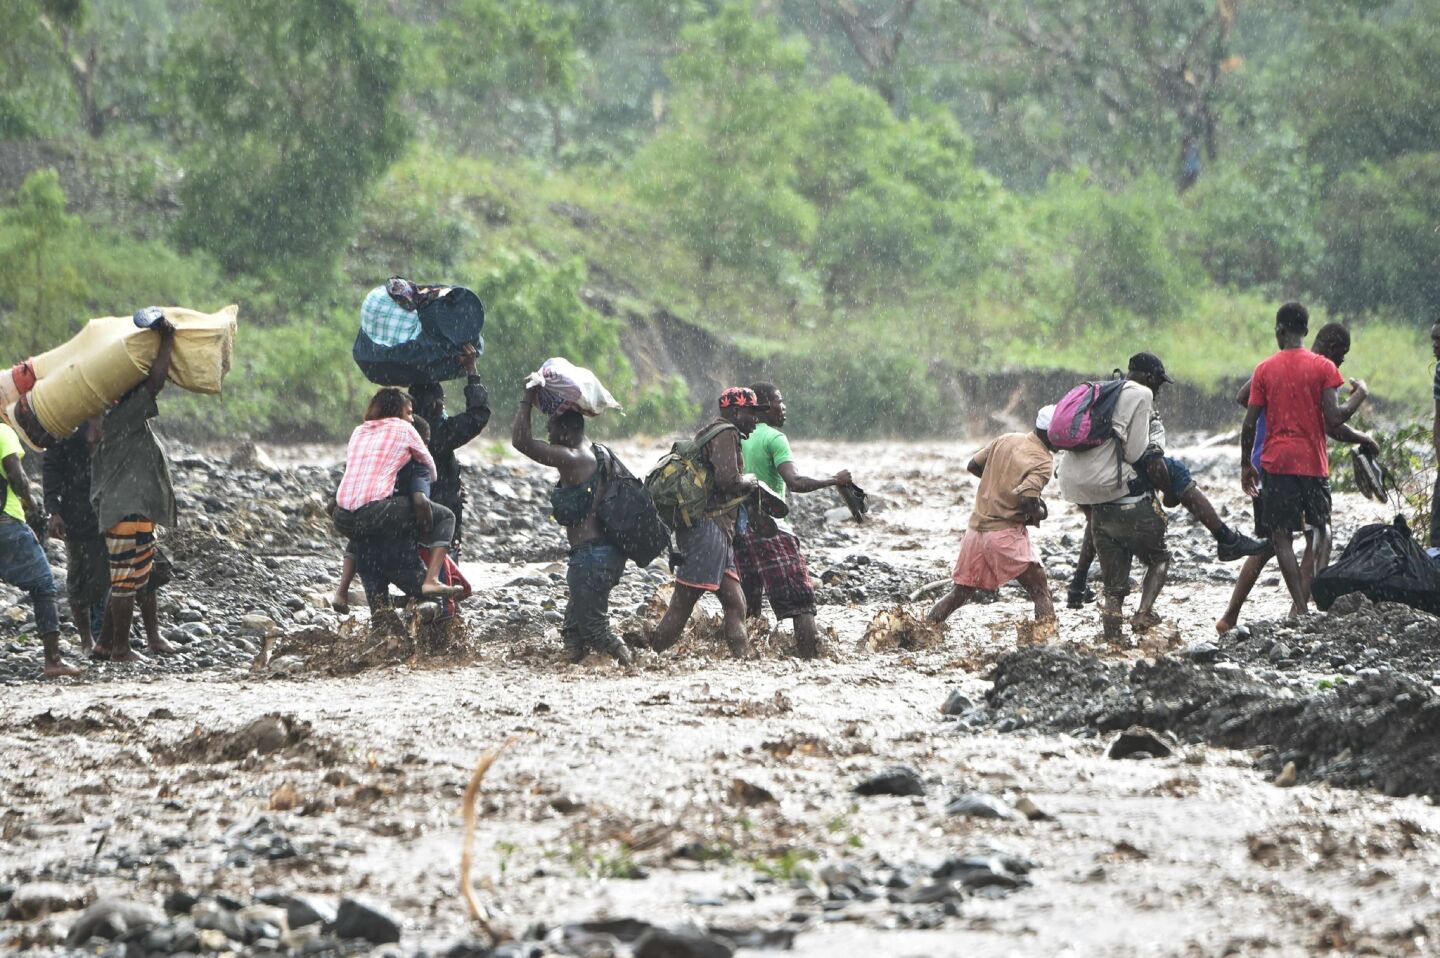 Haitian people cross the river La Digue in Petit Goave, southwest of Port-au-Prince, after Hurricane Matthew.